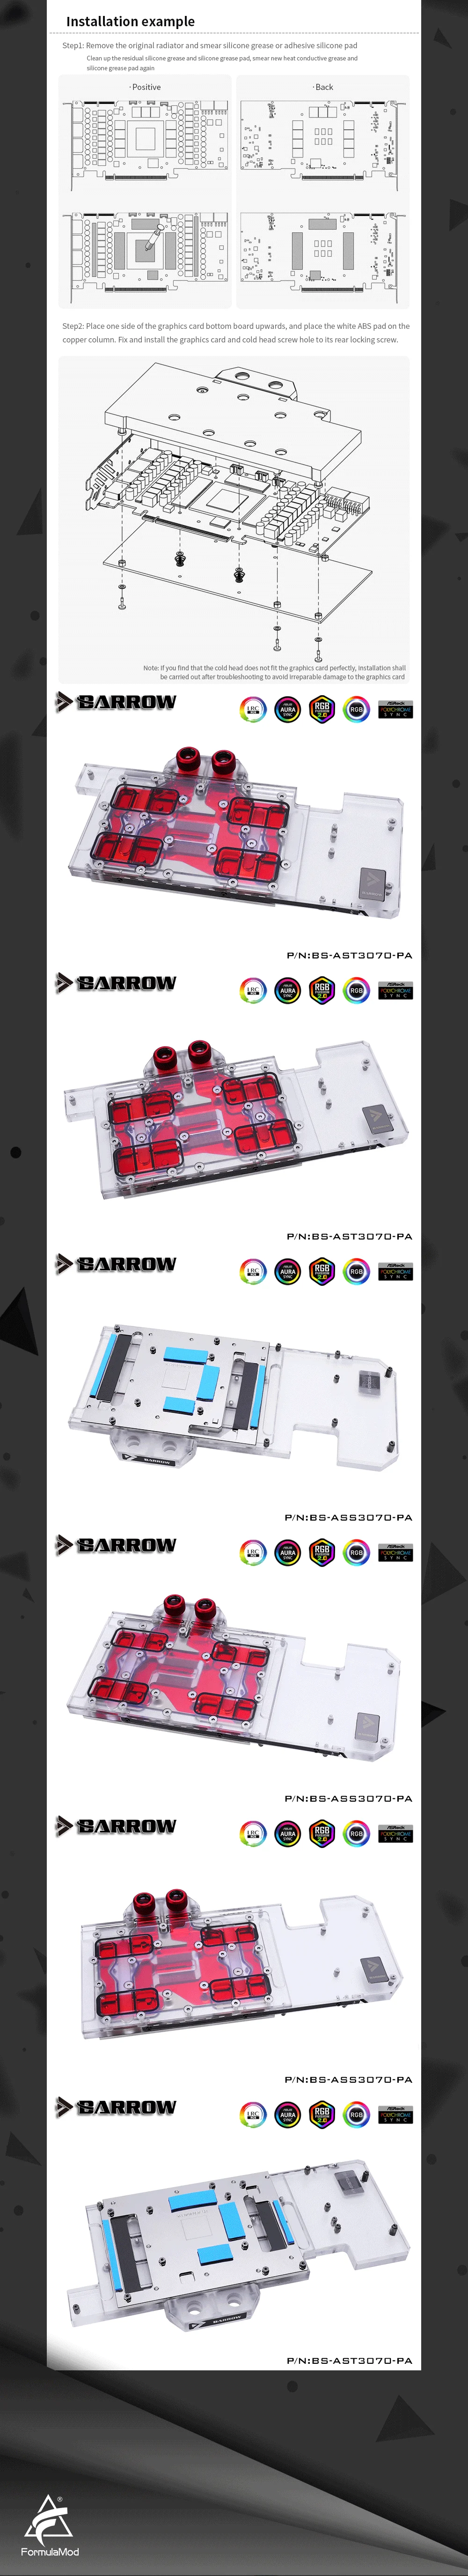 Barrow 3070 GPU Water Cooling Block For ASUS RTX3070 Graphics Card , Full Cover A-RGB Cooler, BS-ASS3070-PA BS-ADS3070-PA  